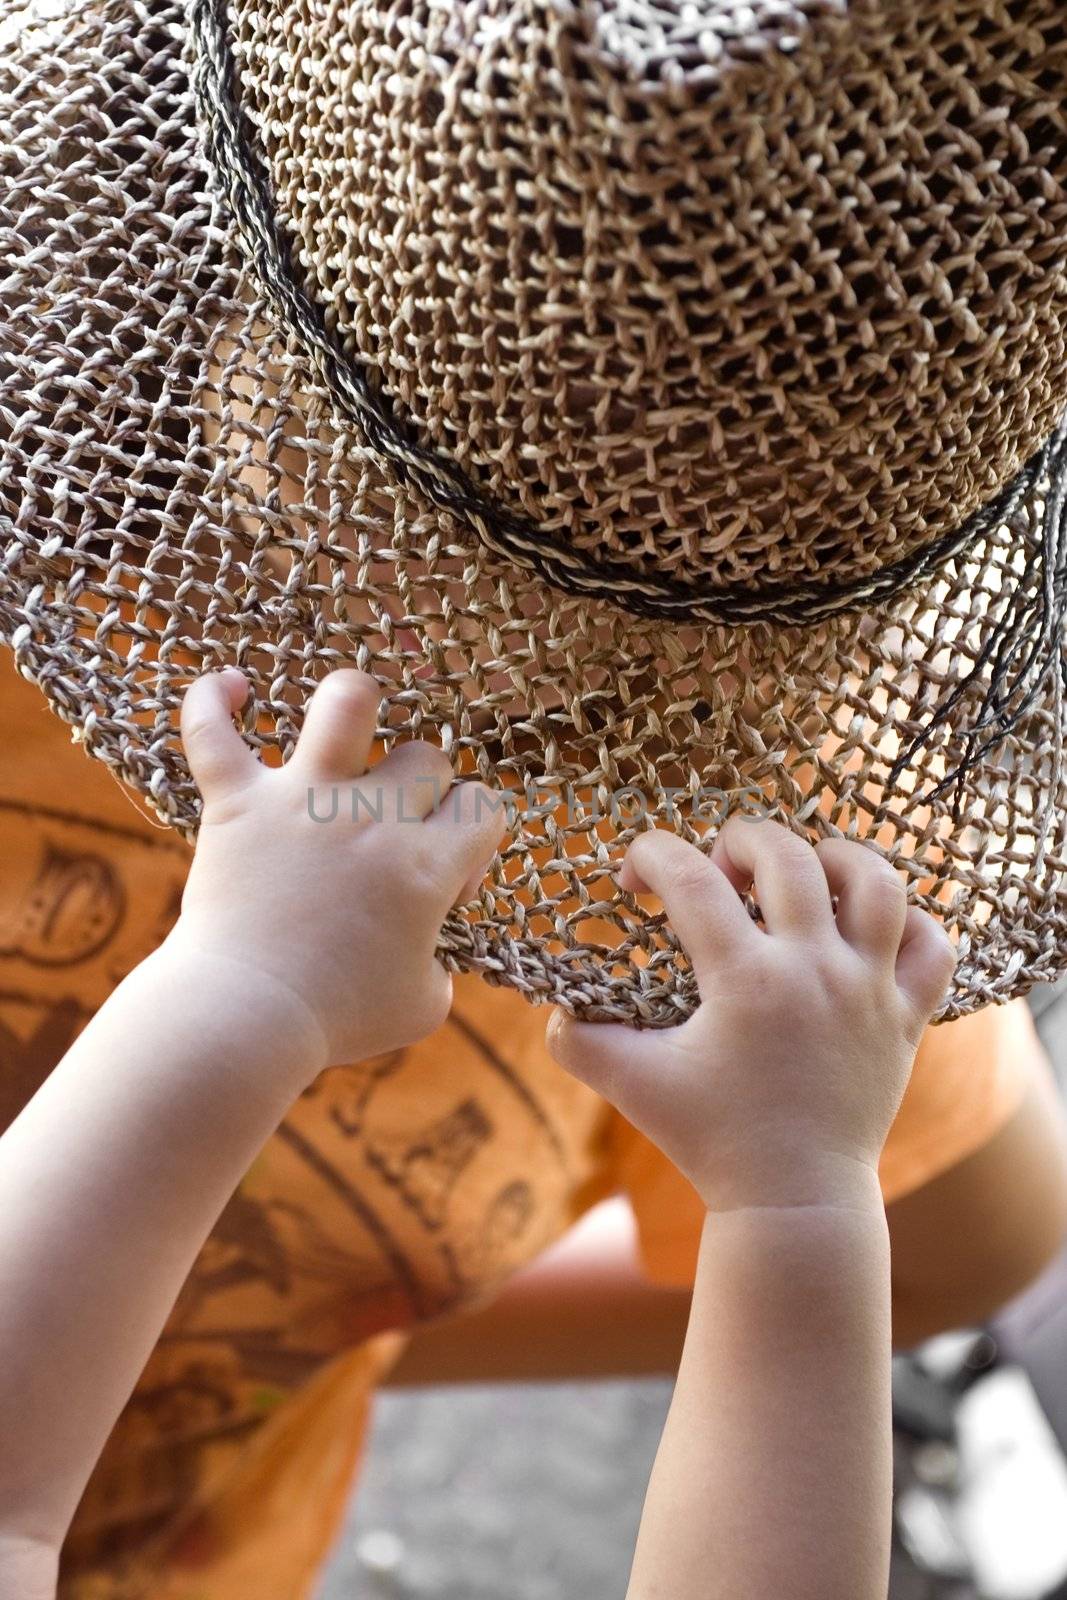 photo of a baby's hand grabbing a girl's hat - achievement